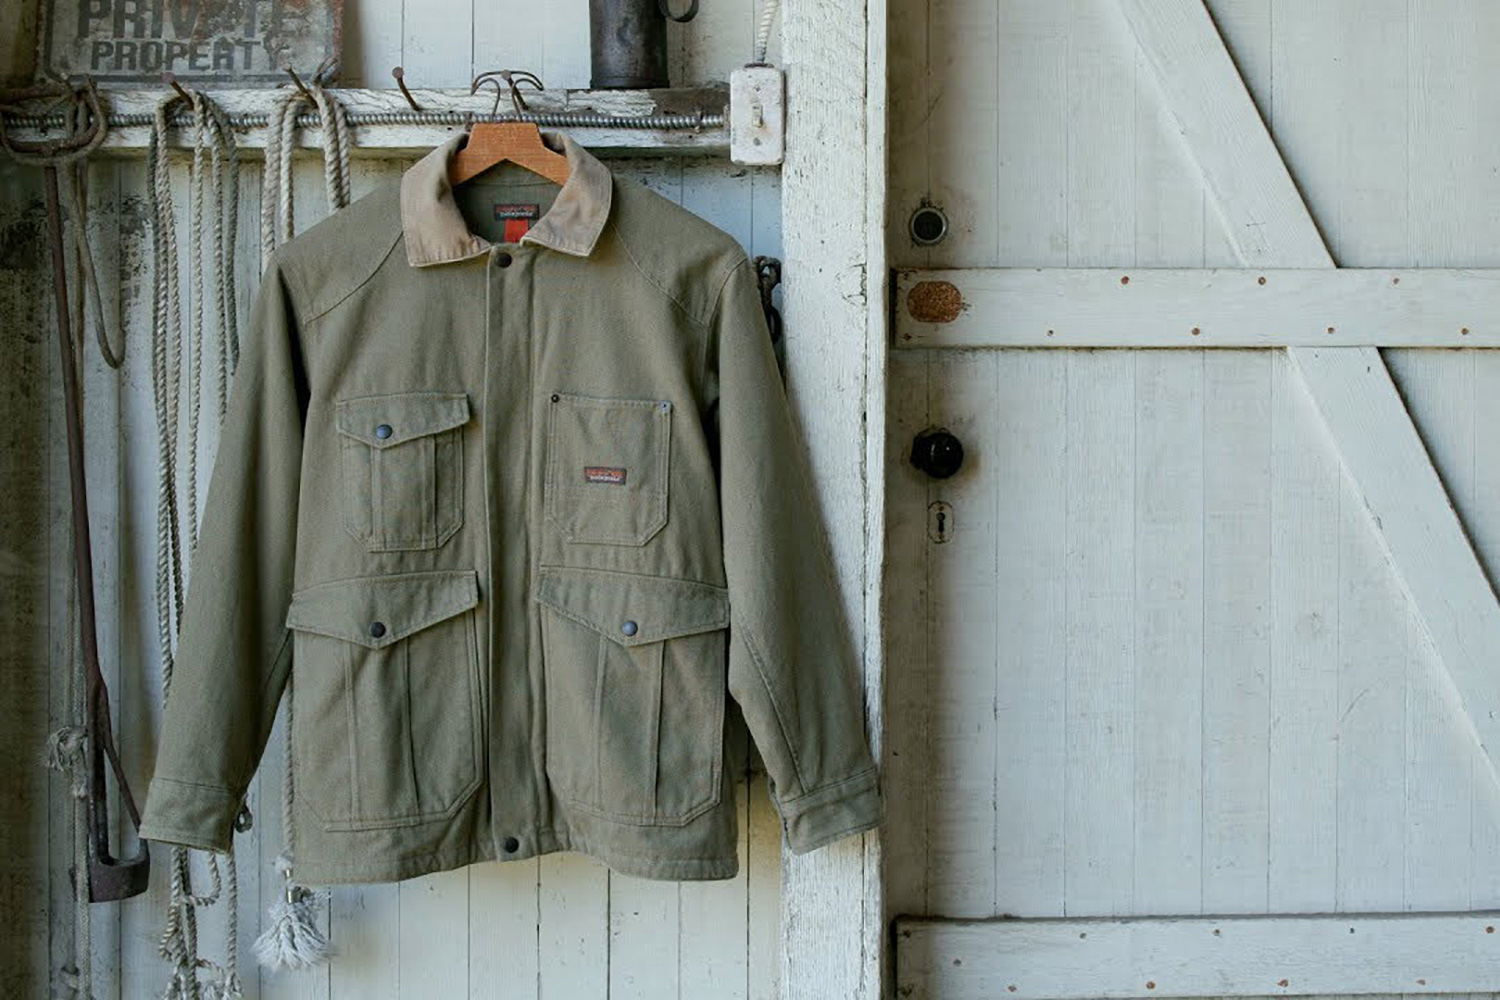 The 10 Best Barn Coats for Doing Chores - The Manual